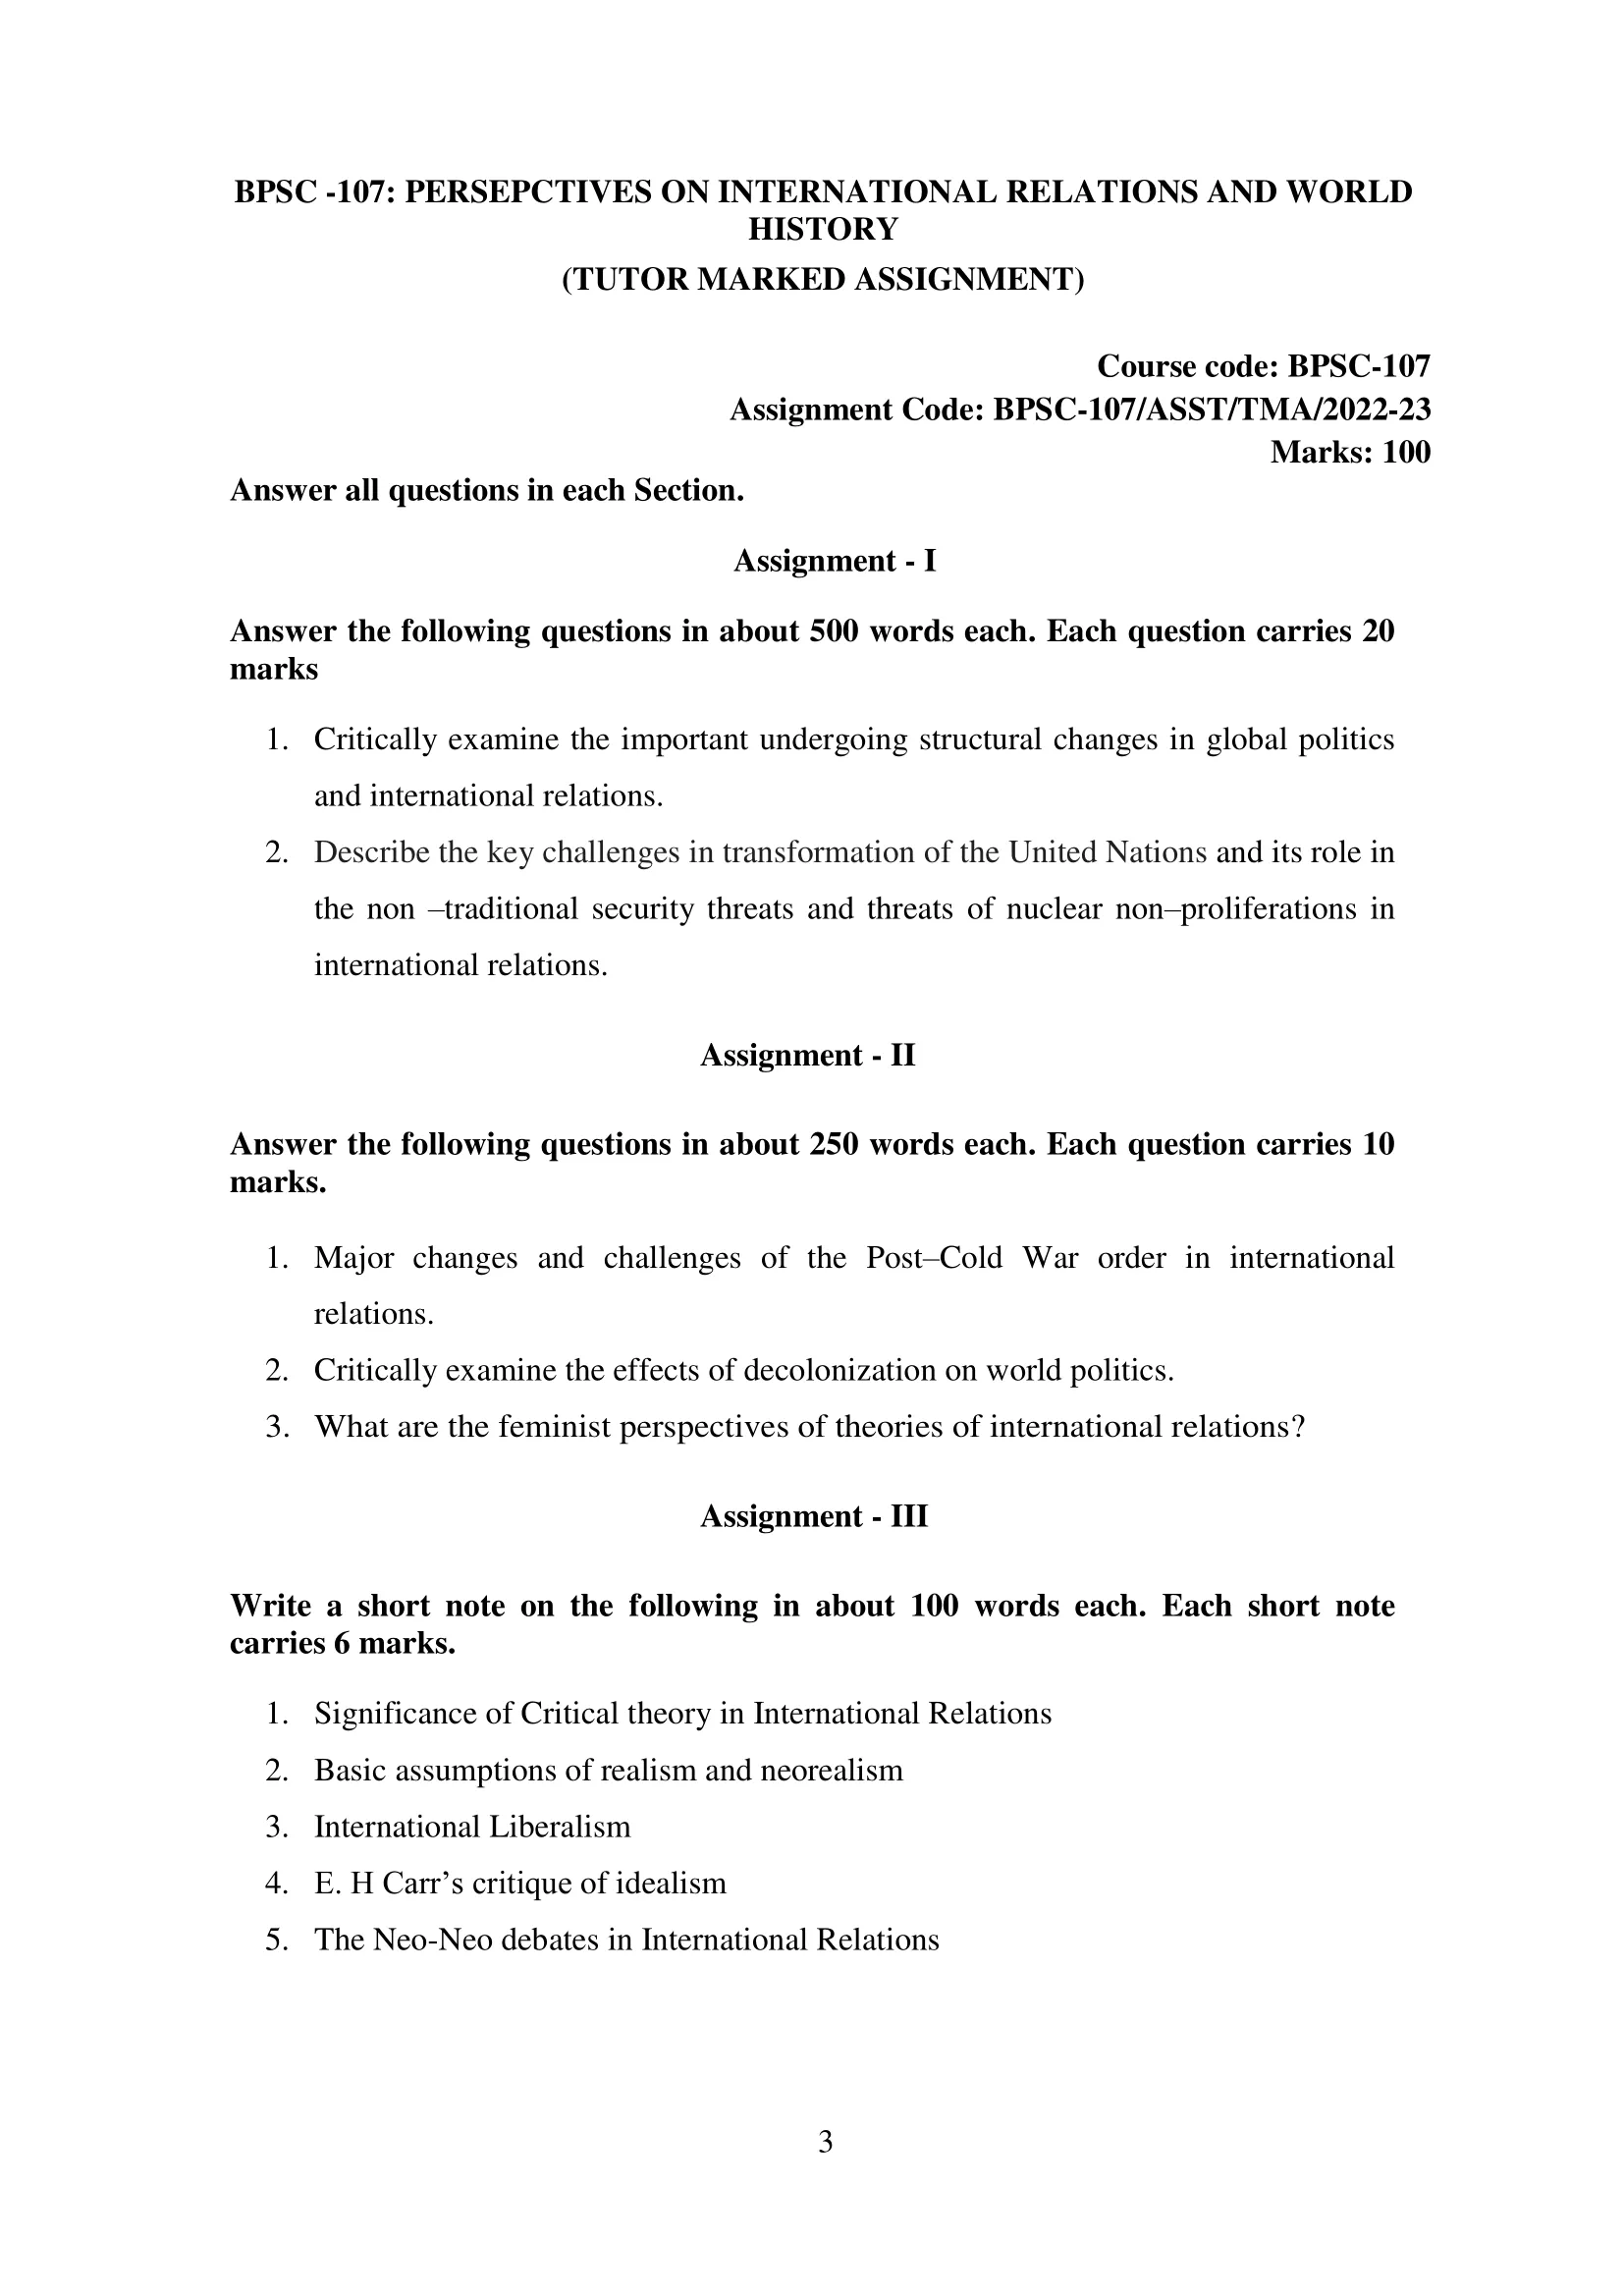 BPSC-107 IGNOU BAG Solved Assignment-PERSEPCTIVES ON INTERNATIONAL RELATIONS AND WORLD